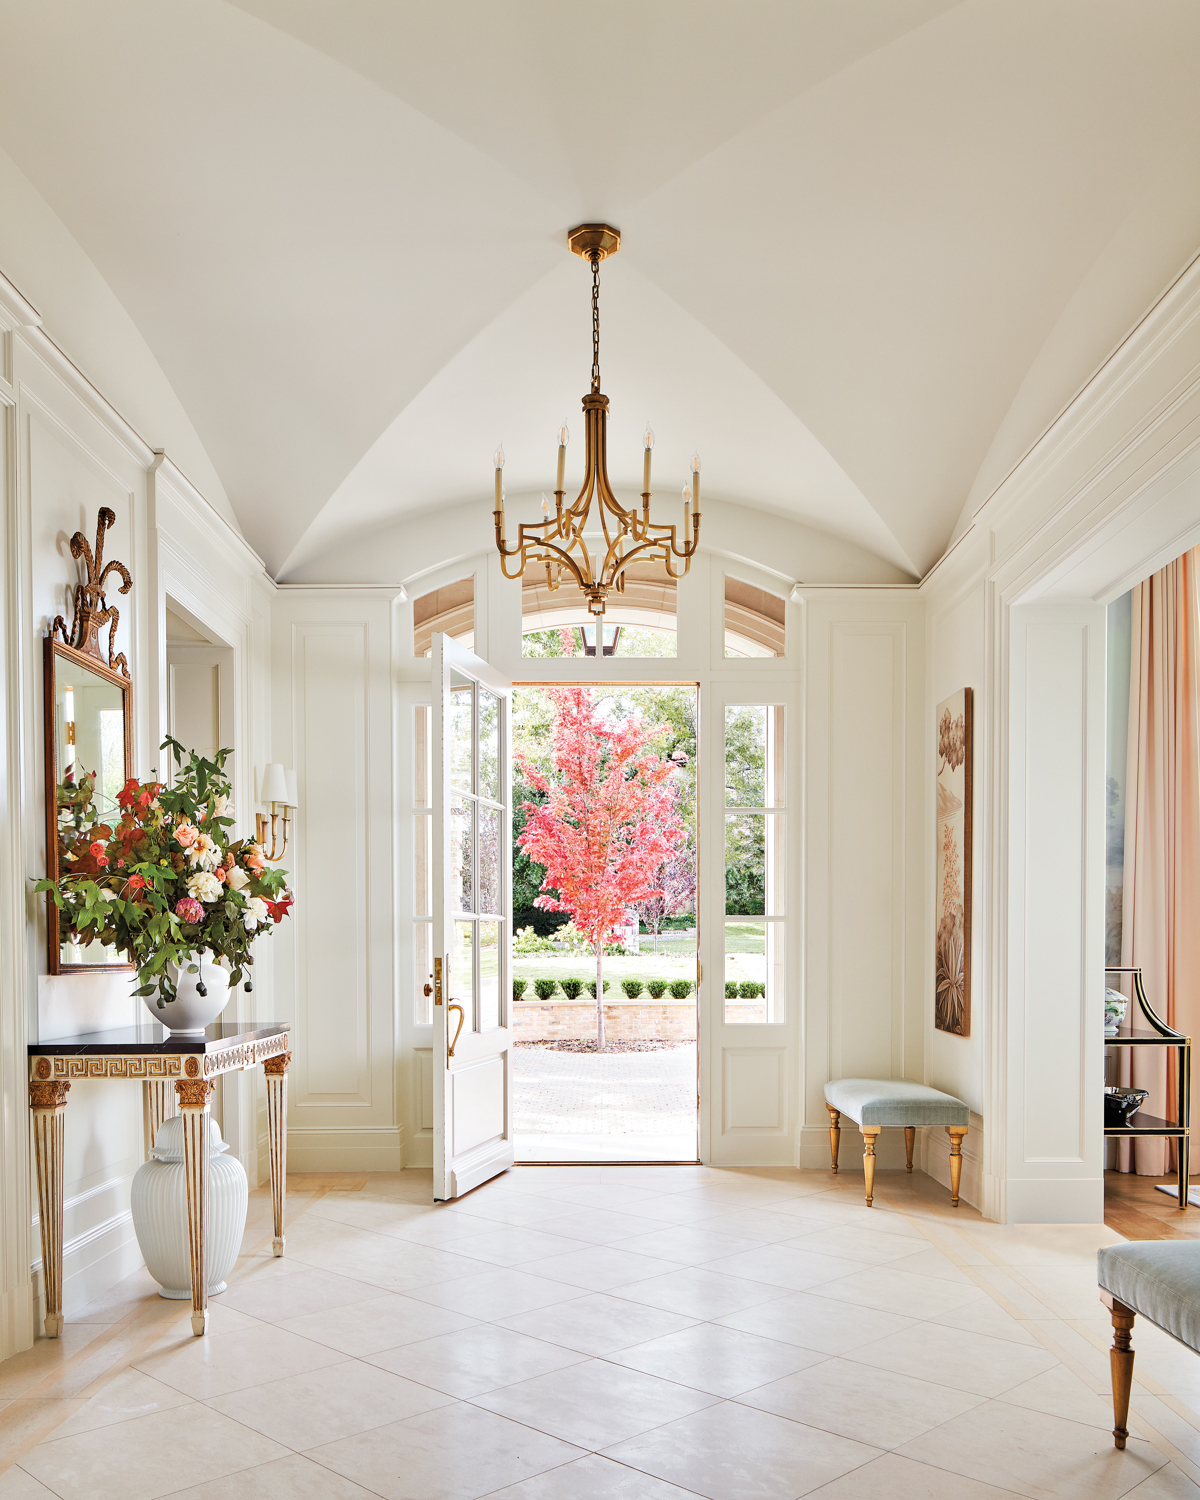 Tour The Artfully Imagined Spaces Within This Stately Dallas Abode